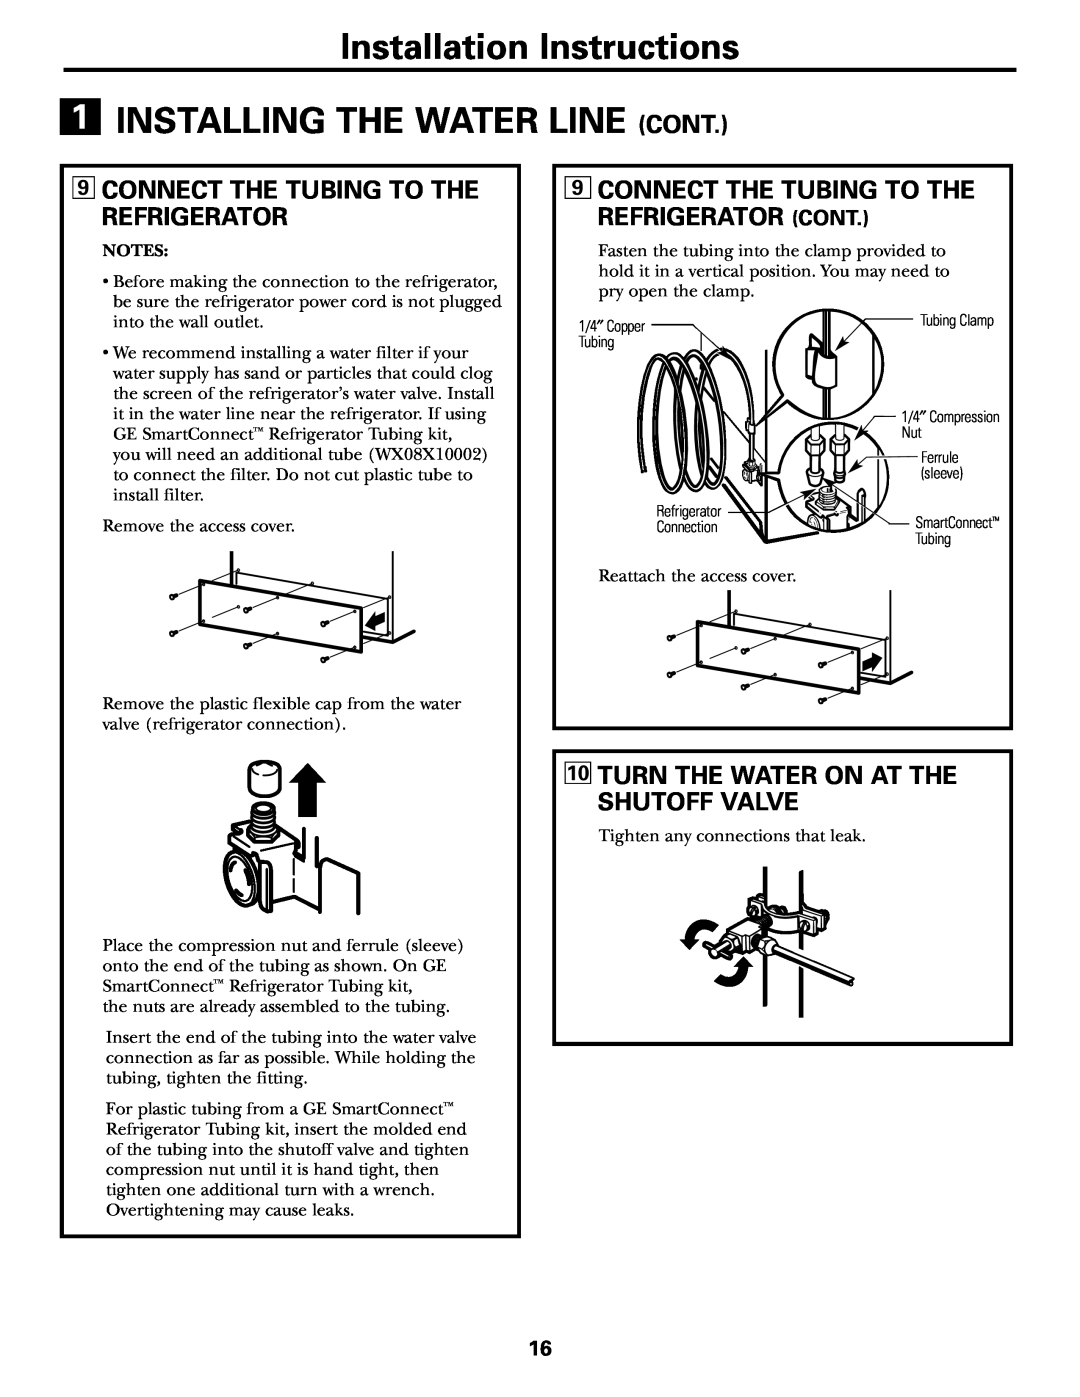 GE 17 Connect The Tubing To The Refrigerator, 9CONNECT THE TUBING TO THE REFRIGERATOR CONT, Installation Instructions 